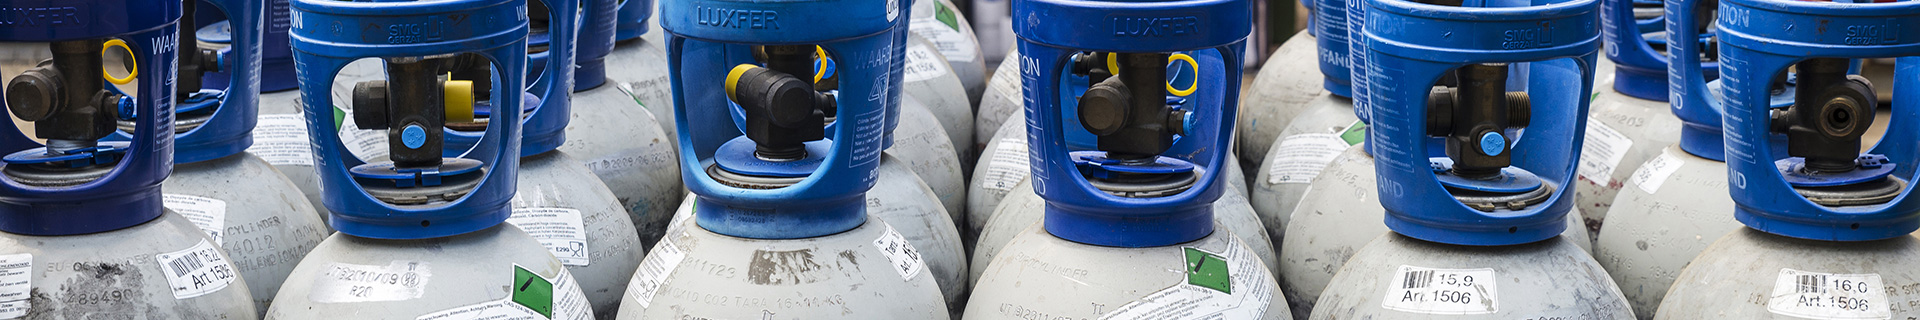 Compressed Gas Cylinders Online